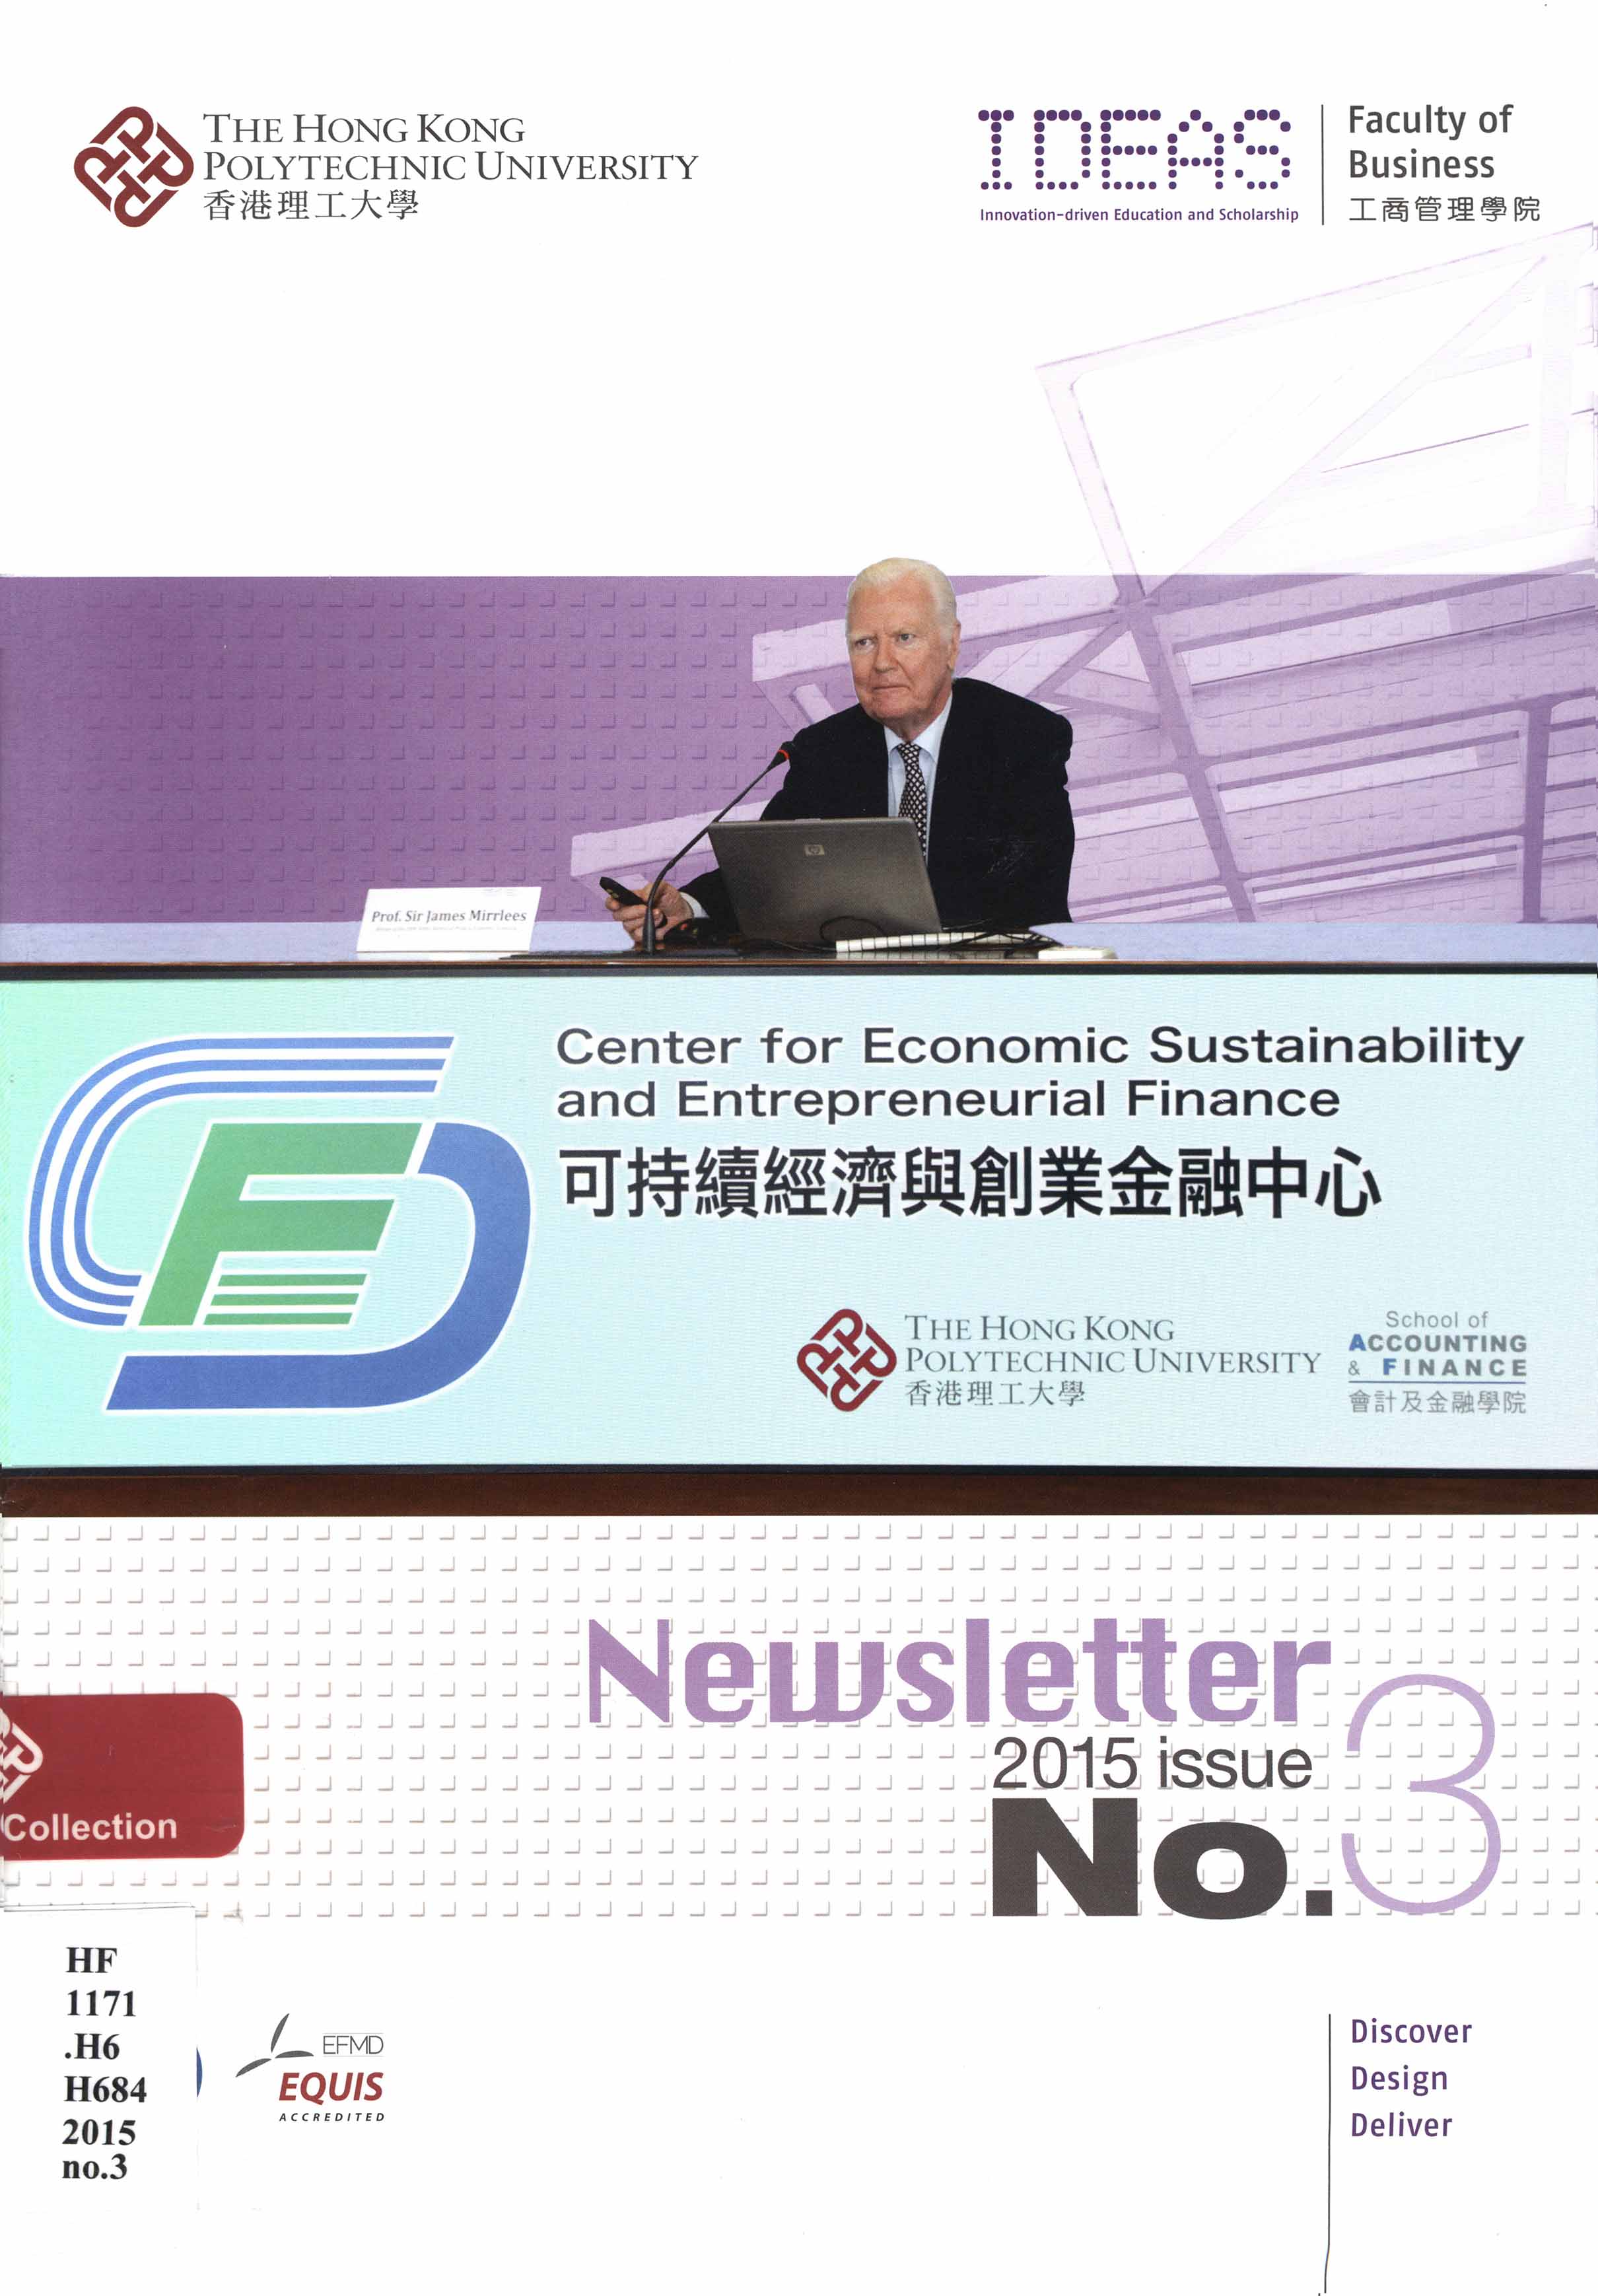 Faculty of Business newsletter. No.3, 2015